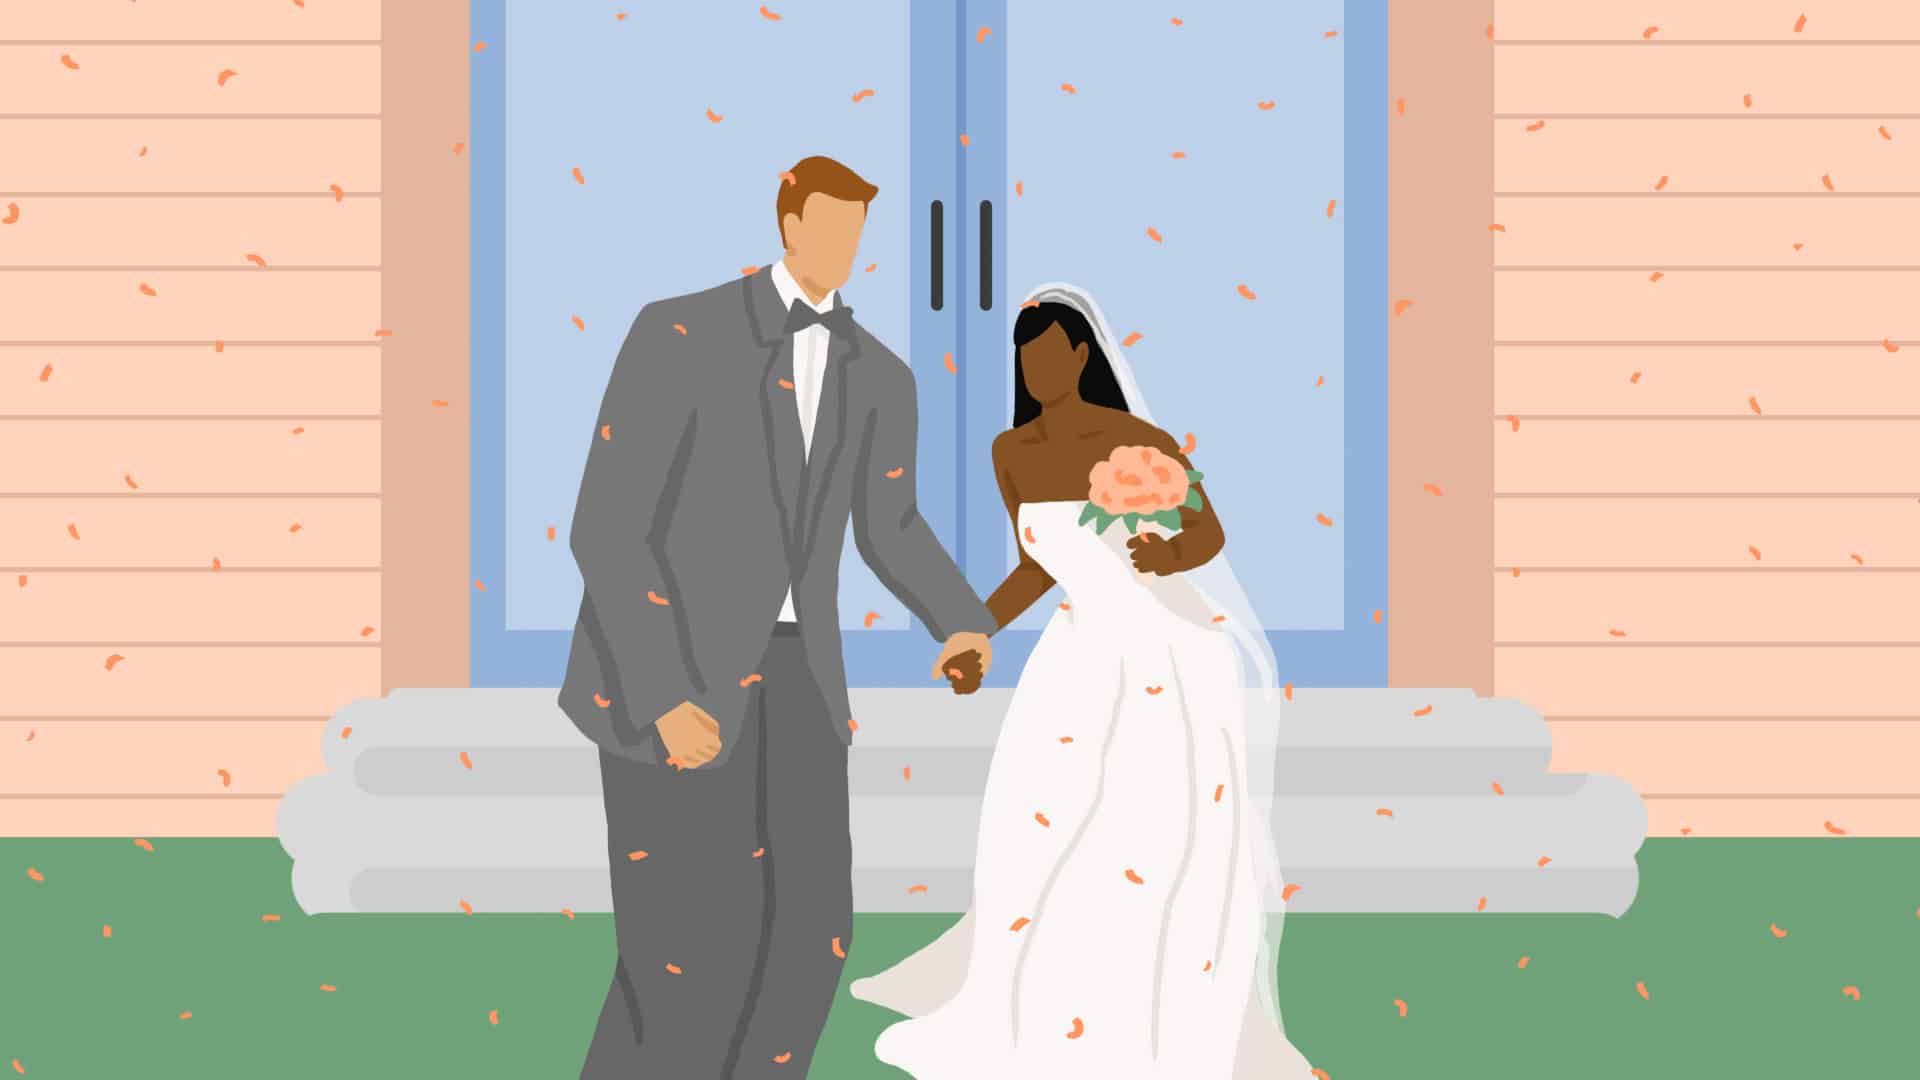 Illustration of a bride holding flowers and holding hands with groom on a front lawn.